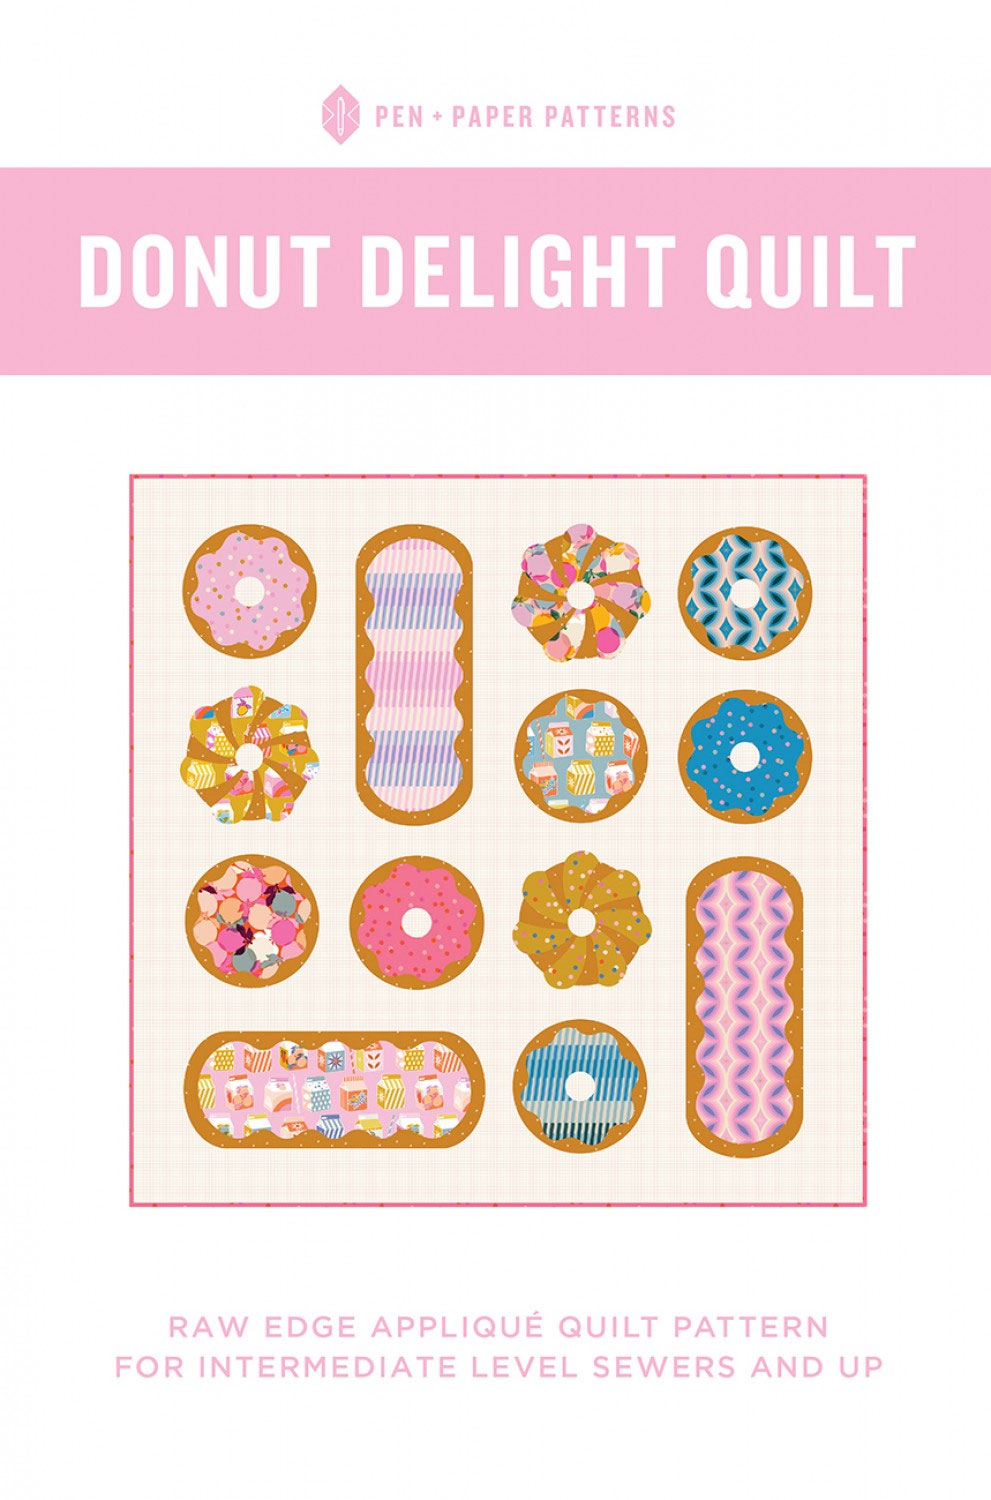 Donut-Delight-quilt-sewing-pattern-from-Pen-plus-paper-patterns-front